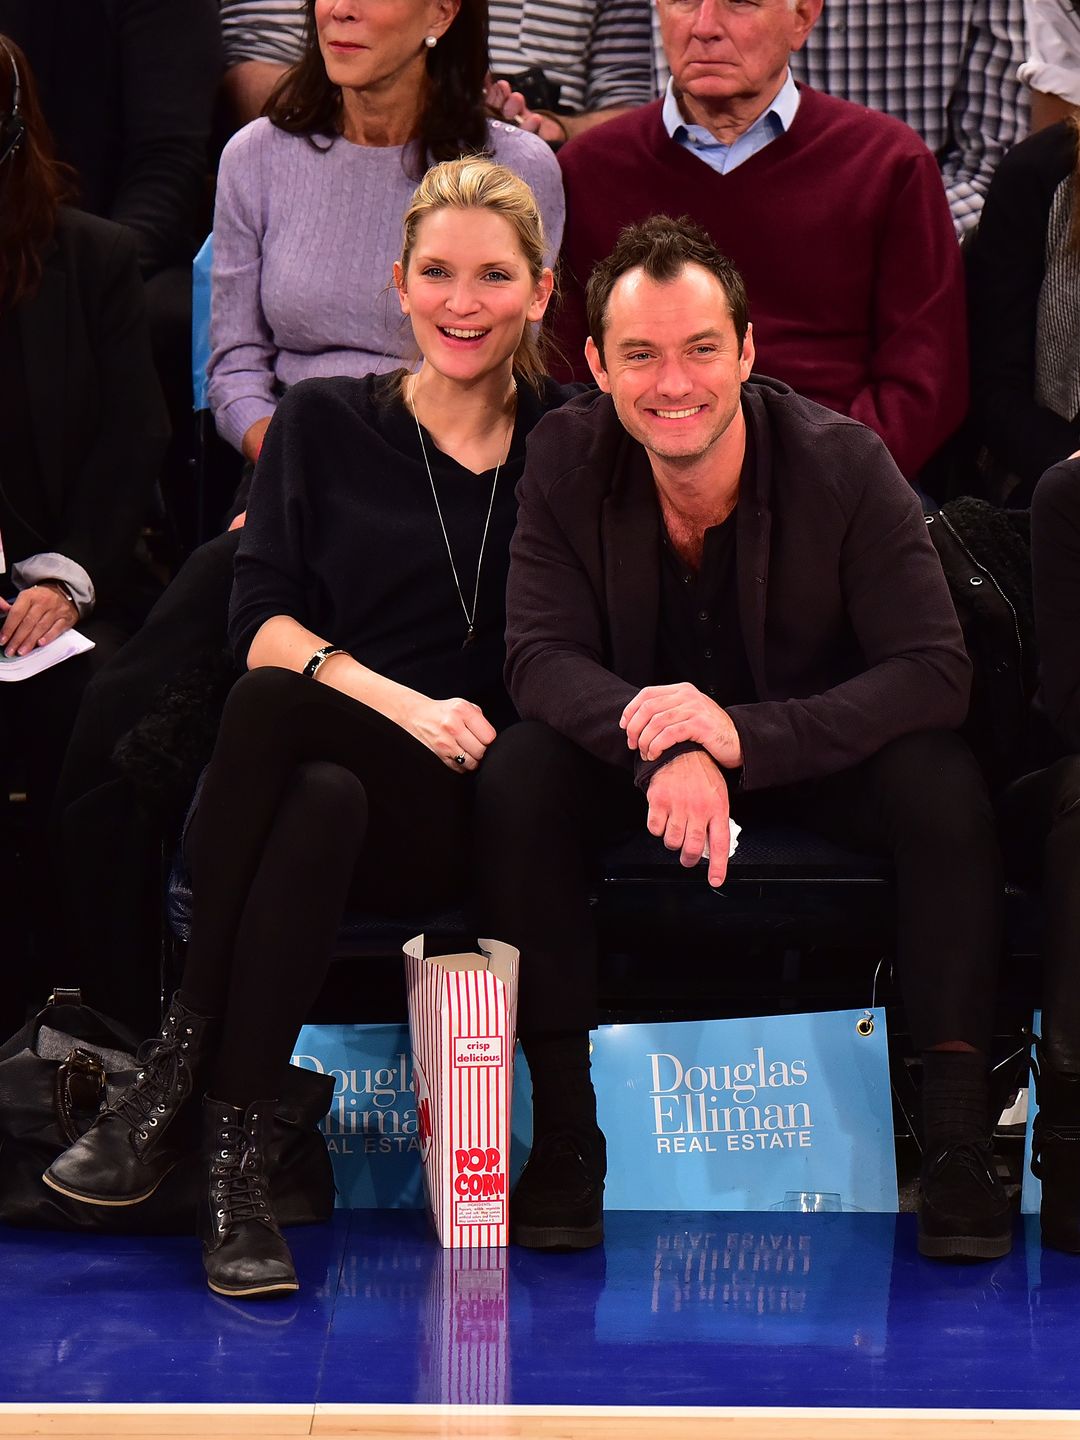 Jude and Phillipa smiling courtside at a basketball game